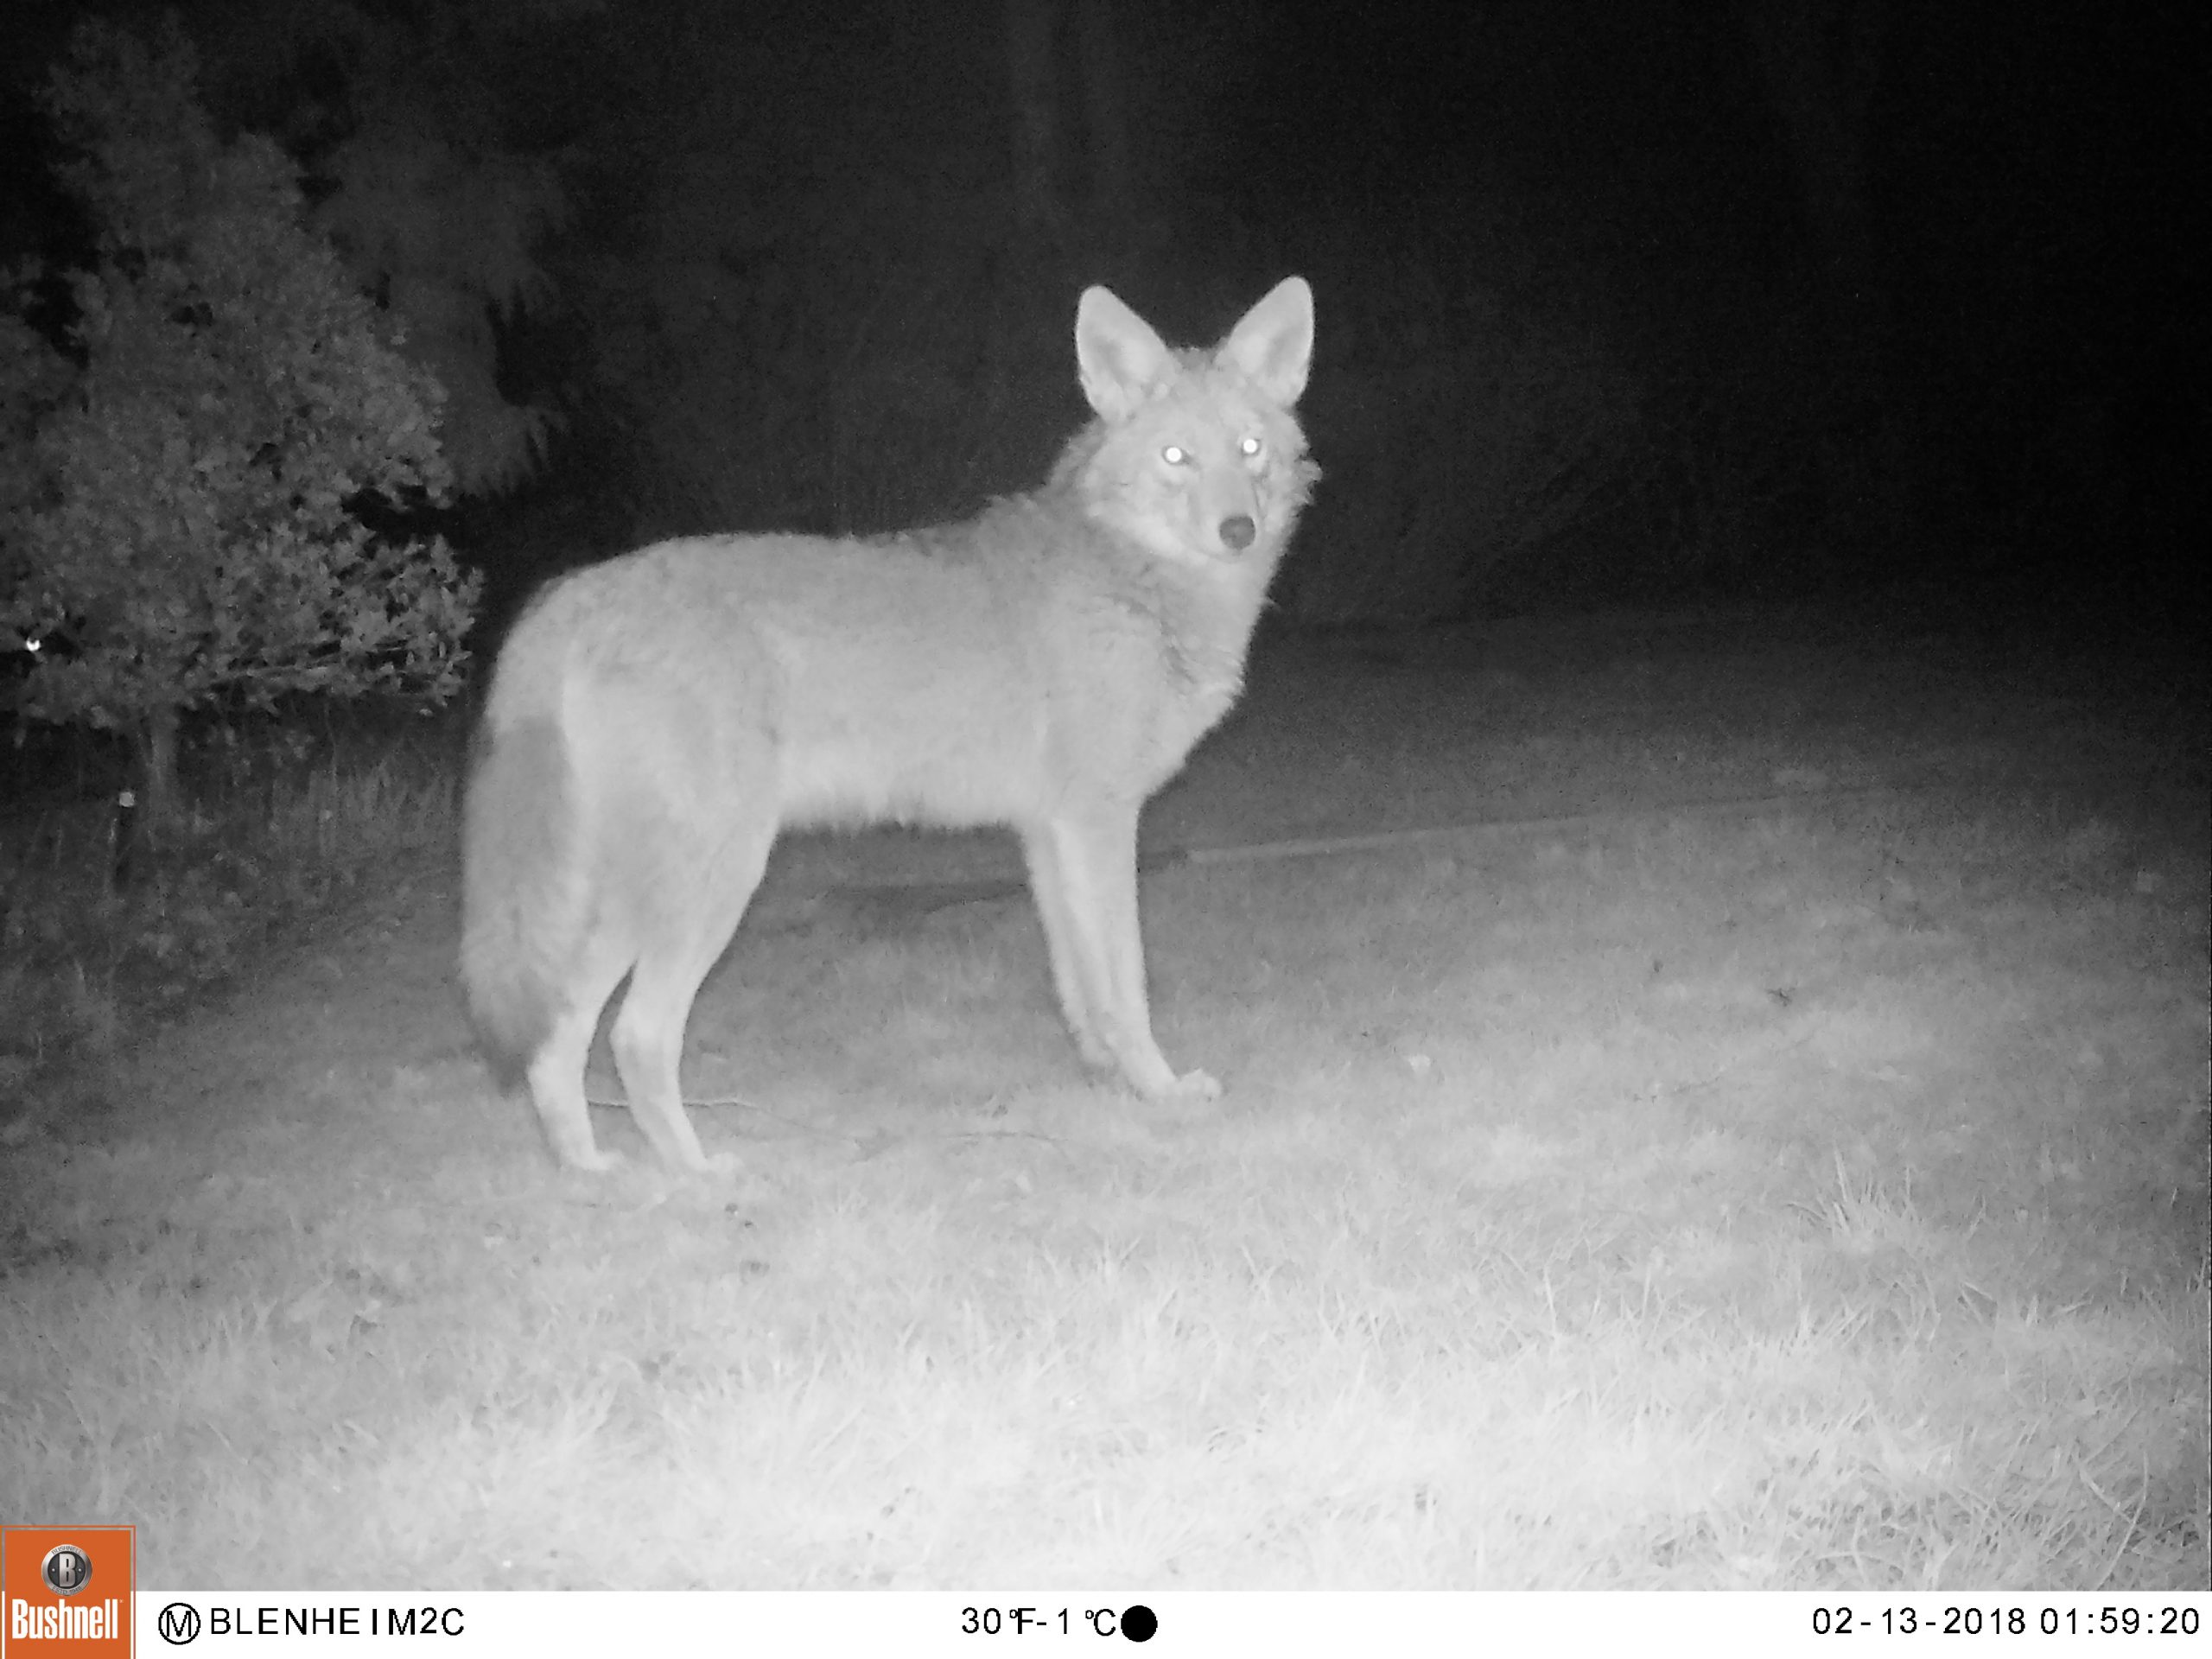 Efficacy of motion-activated sprinklers as a humane deterrent for urban coyotes